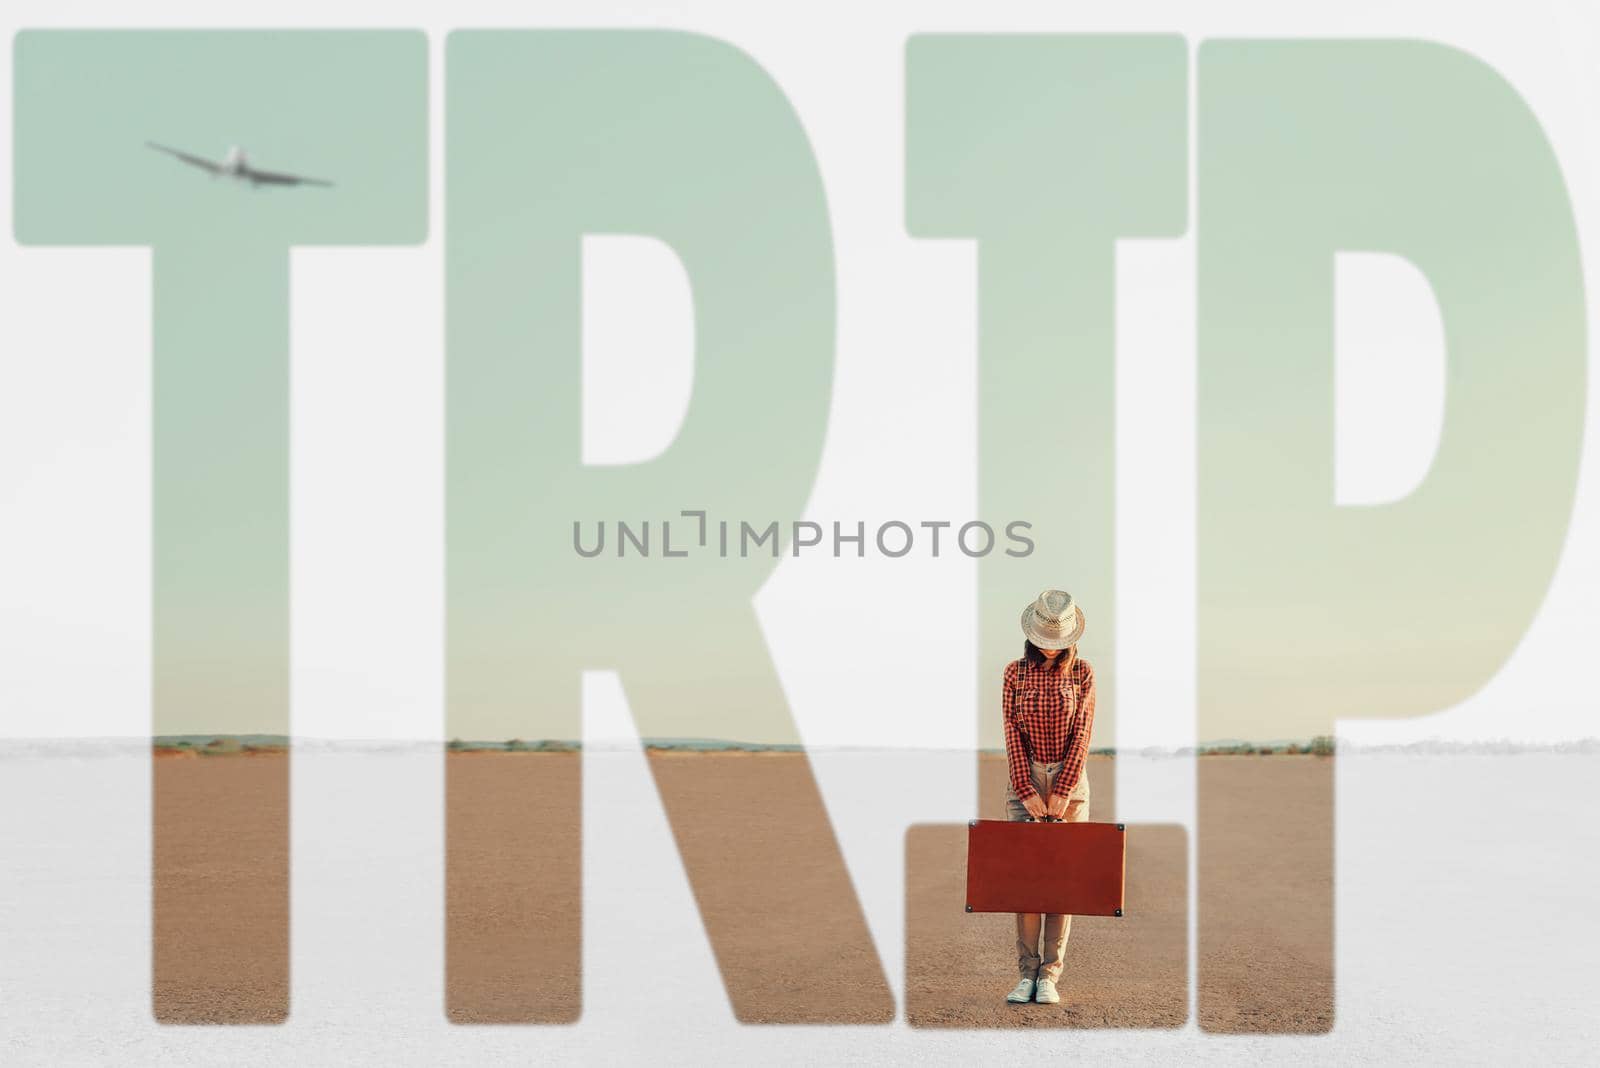 Double exposure word trip combined with image of traveler woman with suitcase on road. Concept of travel